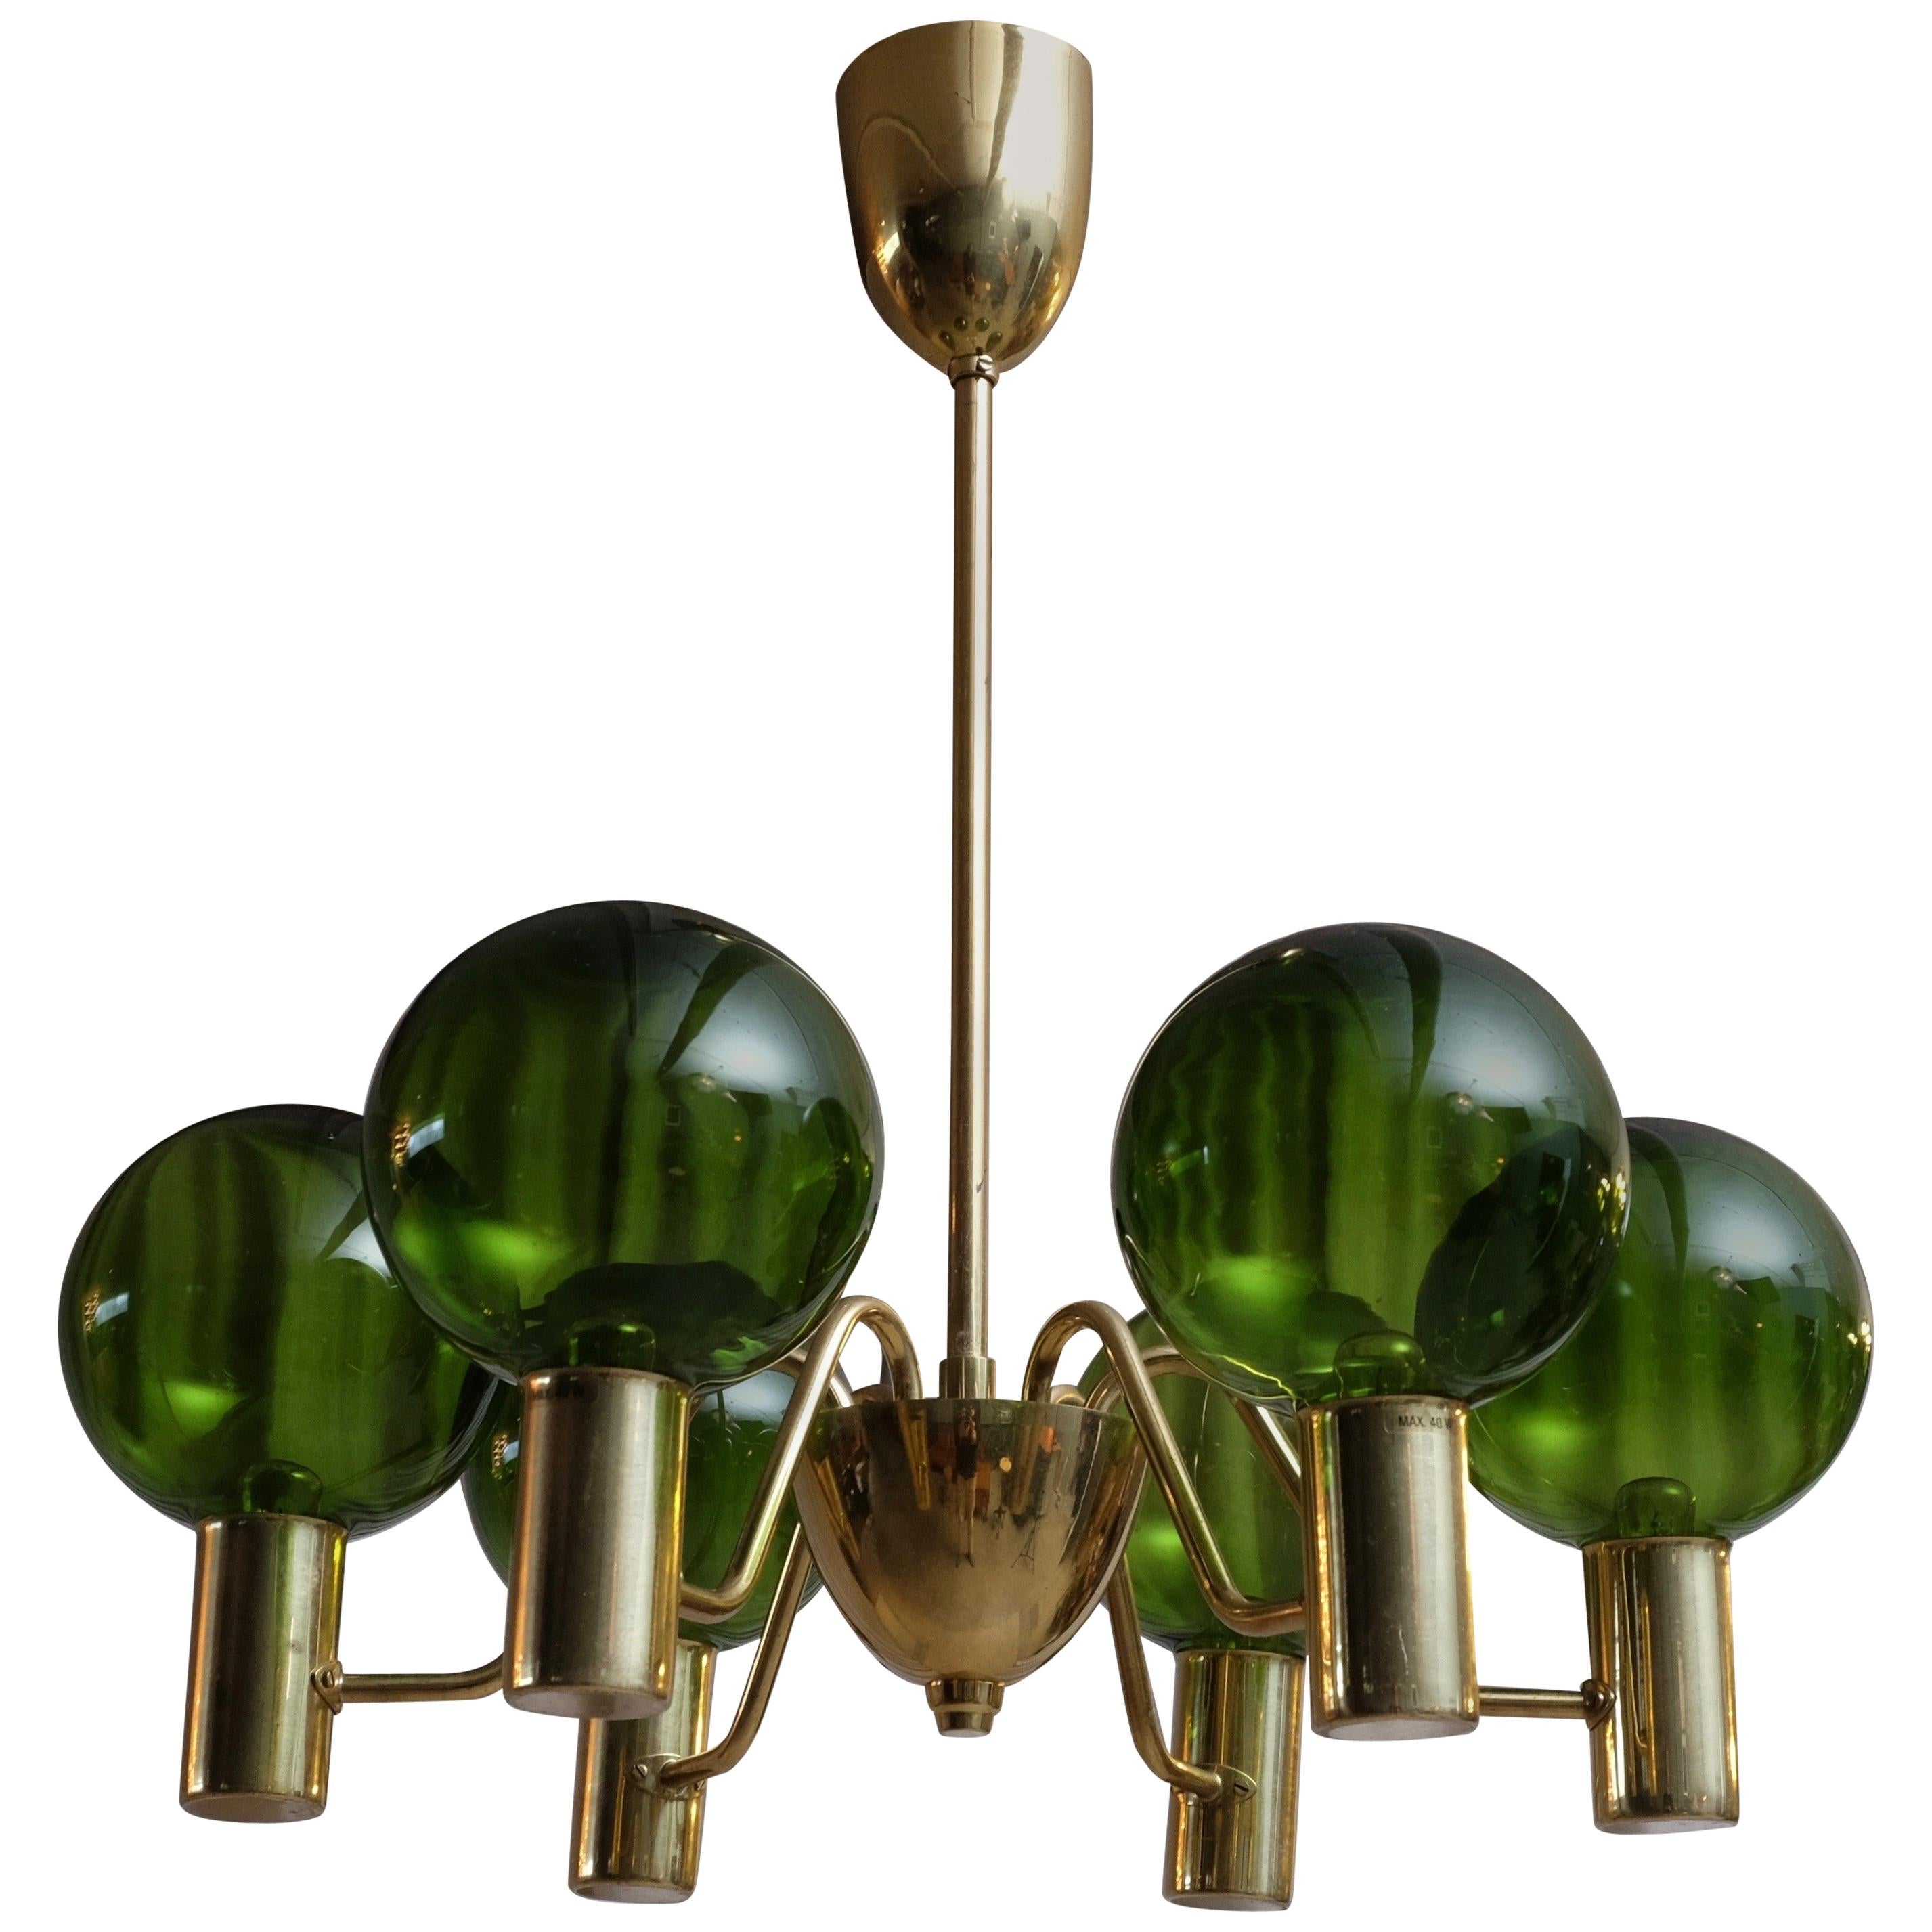 Rare Pair of Hans-Agne Jakobsson Chandeliers T372/6 Patricia, 1960s